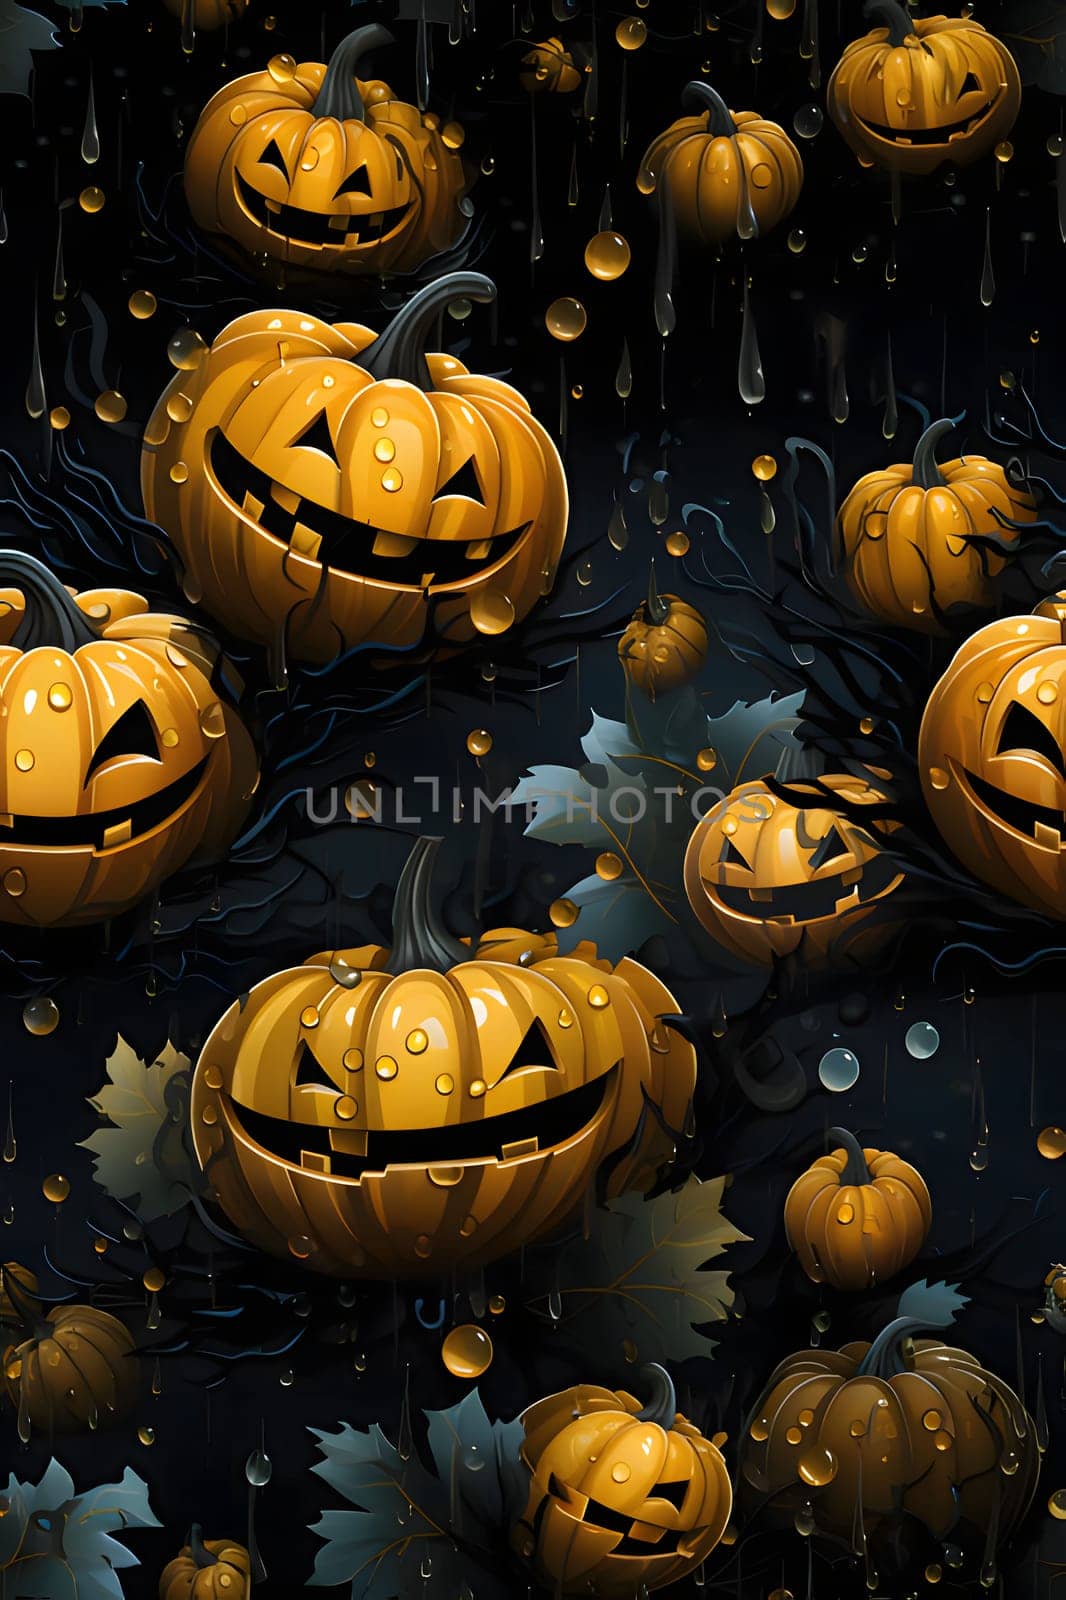 Elegant and modern. Jack-o-lantern pumpkins and rain as abstract background, wallpaper, banner, texture design with pattern - vector. Dark colors.